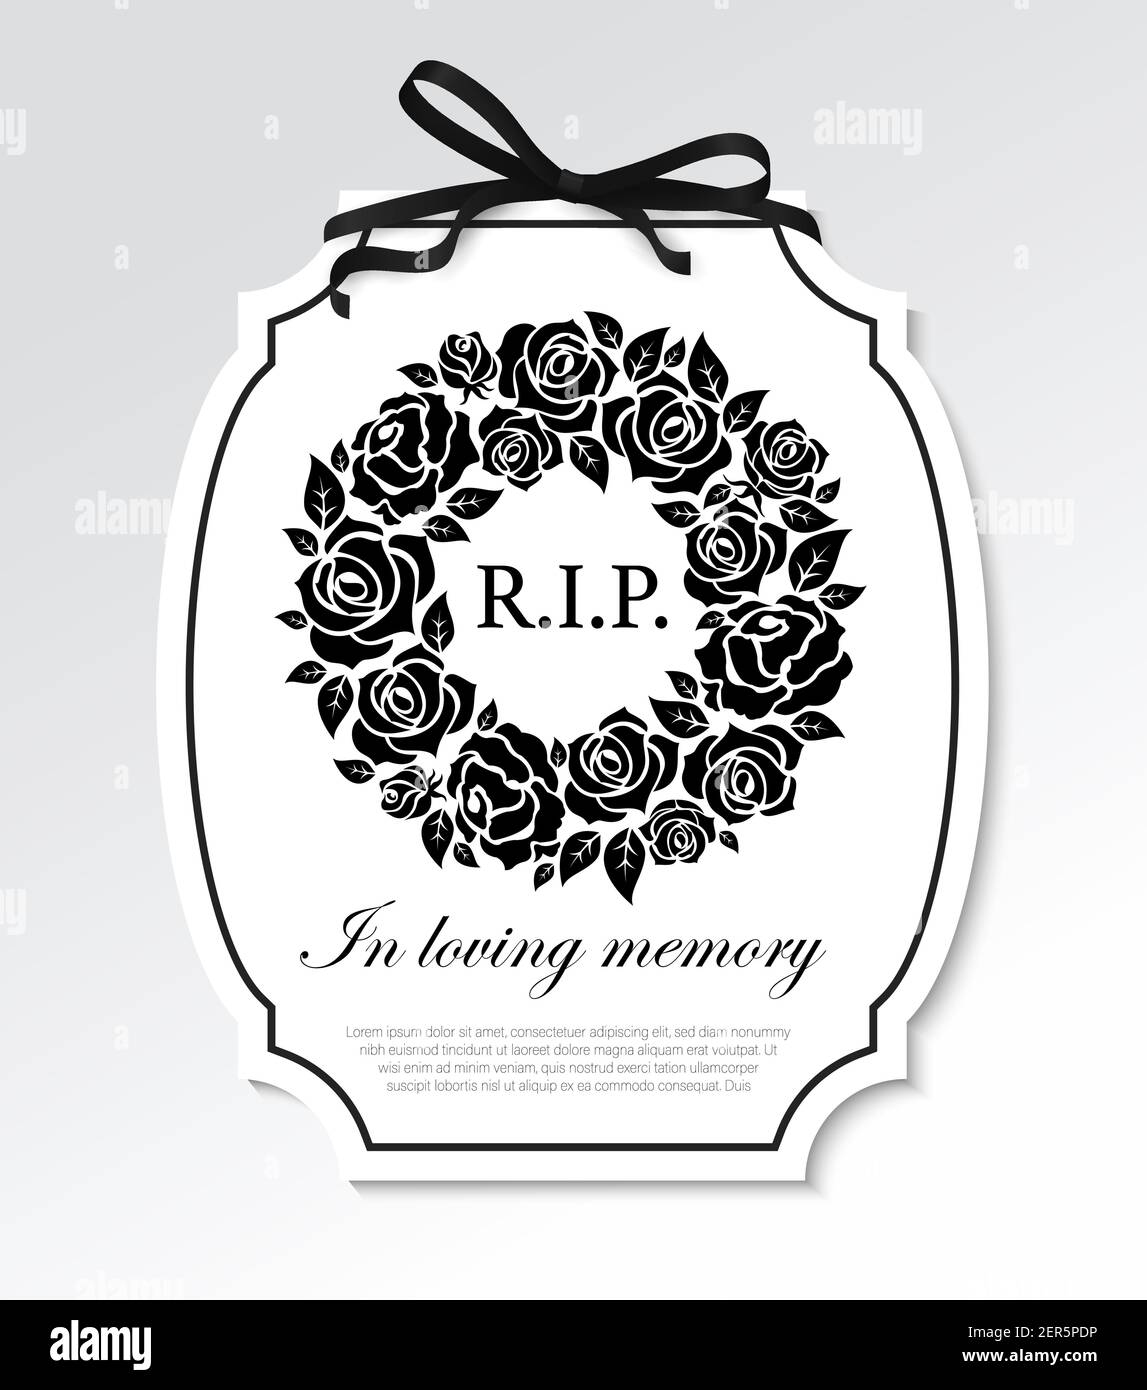 Funeral frame with black flowers round wreath, mourning ribbon bow and typography. Funereal card with RIP rest in peace and in loving memory condolenc Stock Vector